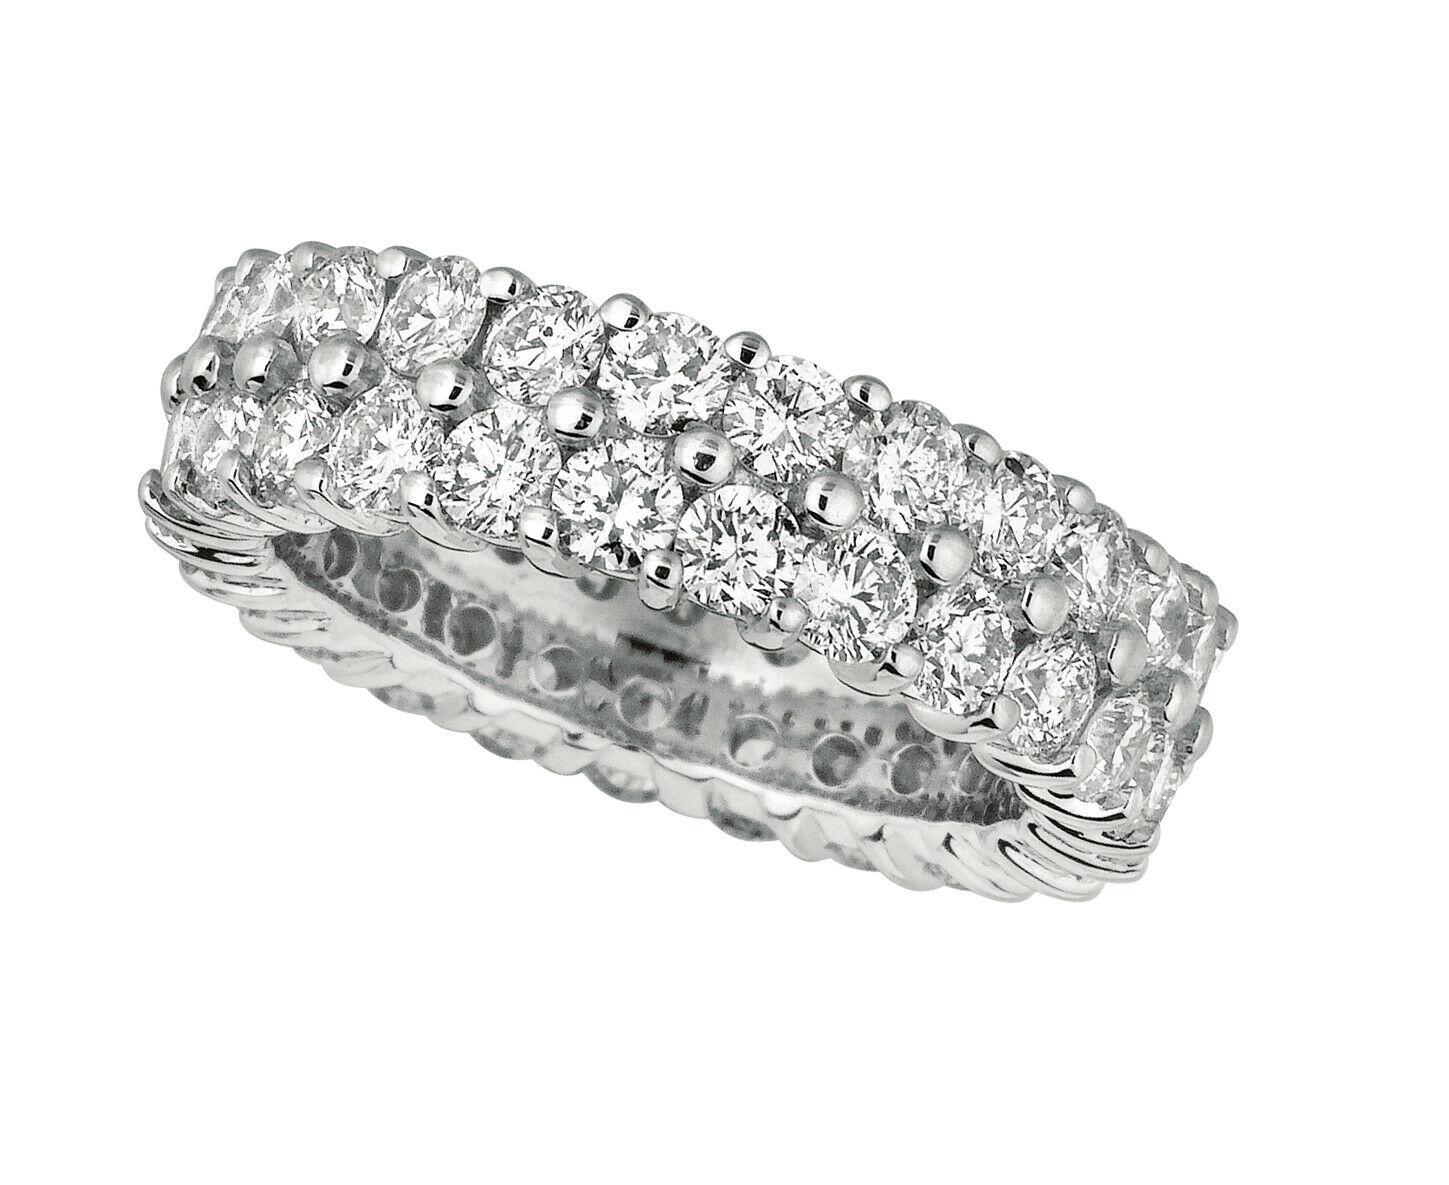 4.30 Ct Natural Round Cut Diamond Eternity 2 Row Ring Band G SI 18K White Gold

100% Natural Diamonds, Not Enhanced in any way Diamond Band 
4.30CT
G-H 
SI  
18K White Gold  Pave set  8.80 grams
6 mm in width 
Size 7
50 diamonds

RT61WD18K
ALL OUR